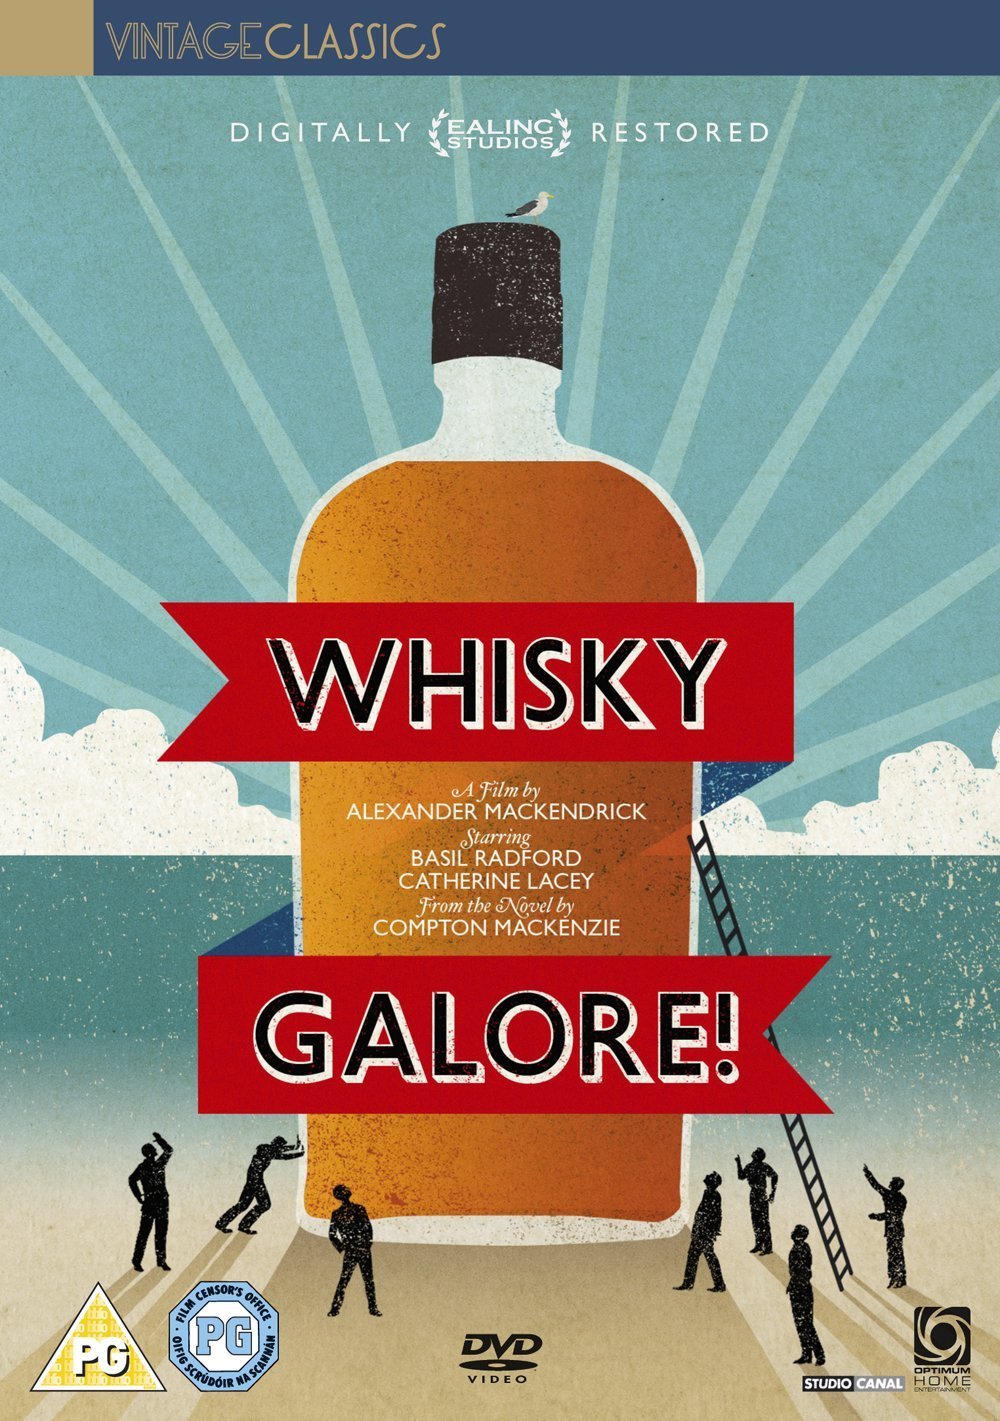 Whisky Galore ! - Digitally Remastered (80 Years Of Ealing) (DVD)